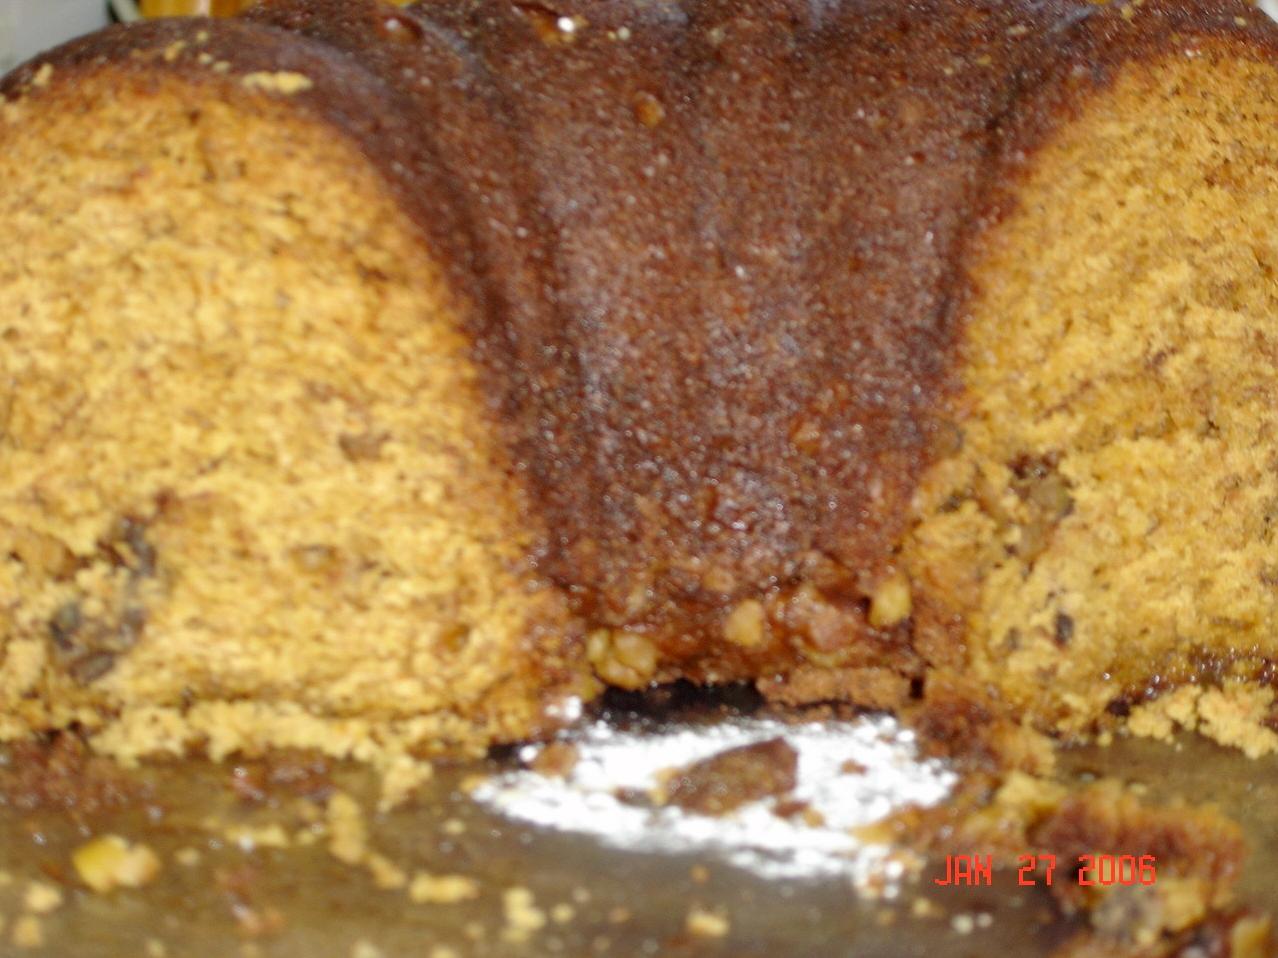  Wake up and smell the delicious aroma of Shoo-Fly Coffee Cake.